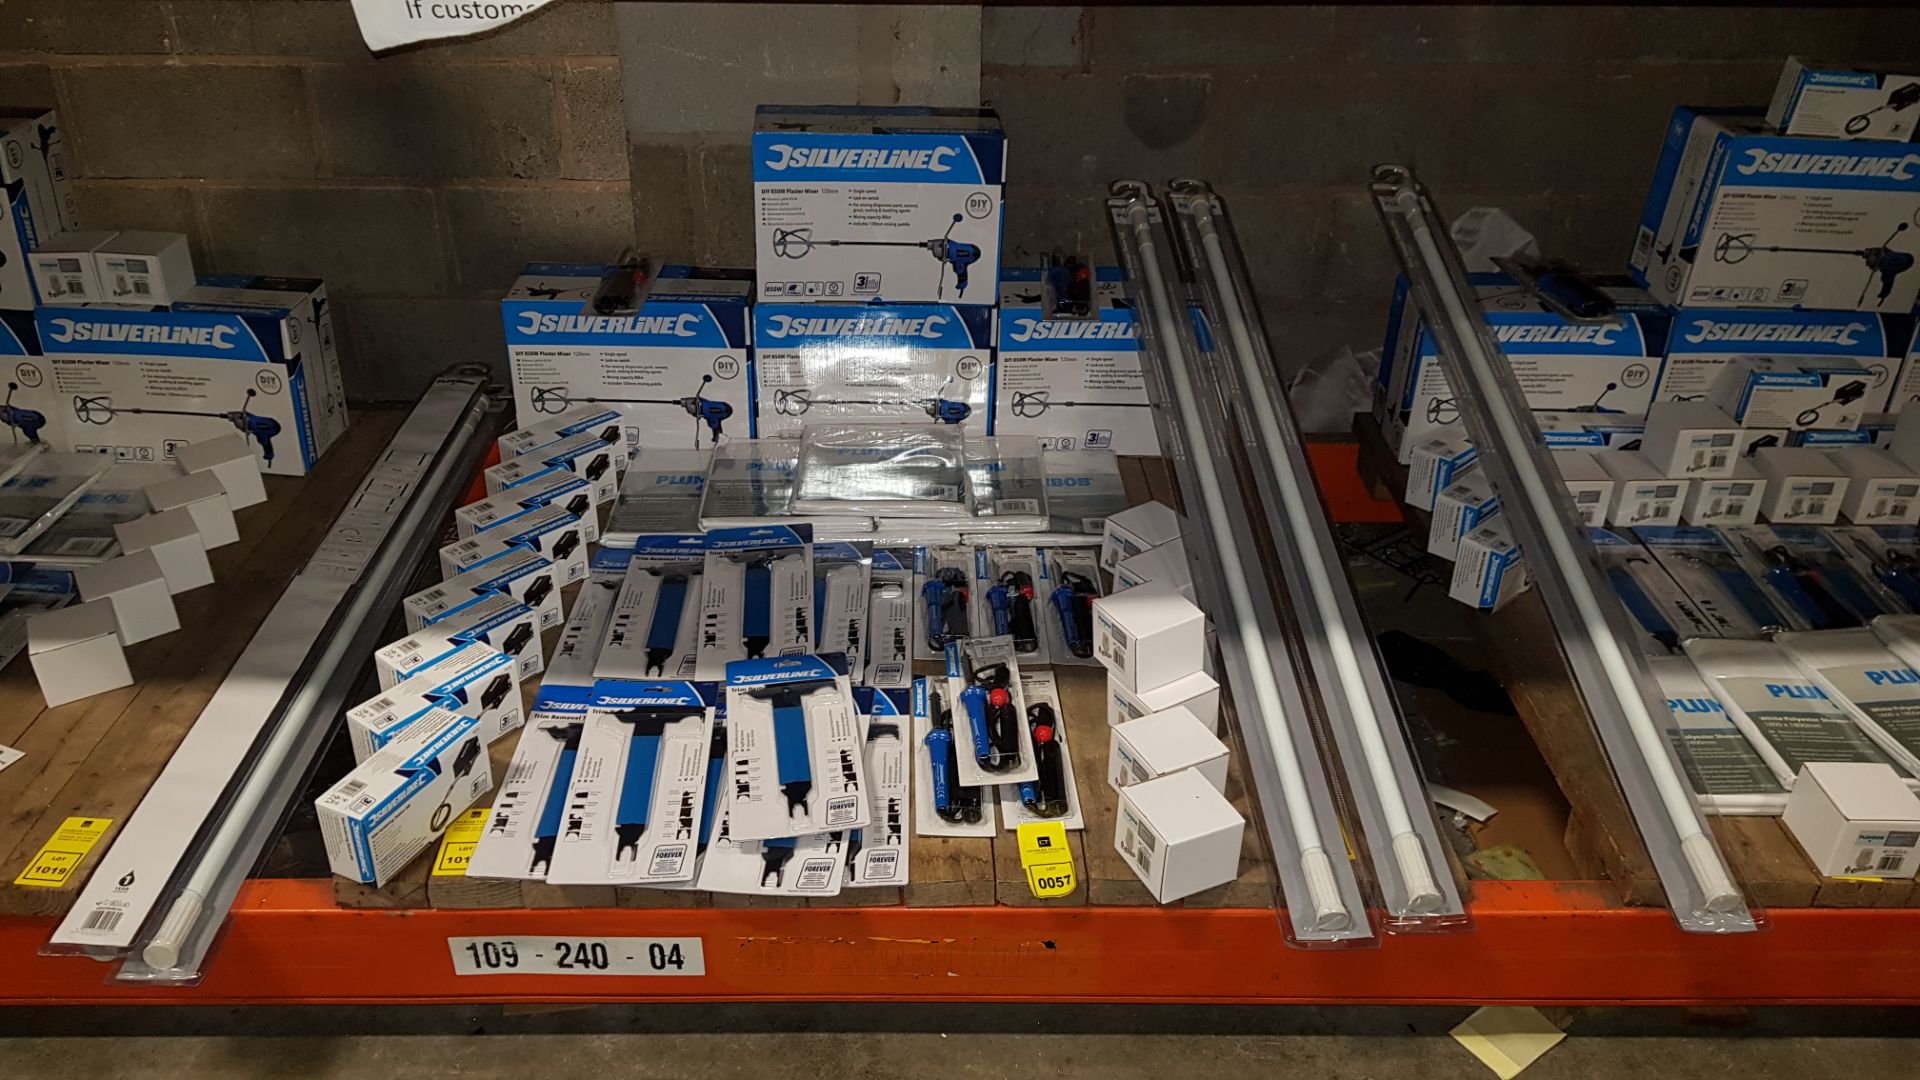 50+ PIECE MIXED TOOL LOT CONTAINING 4 X SILVERLINE DIY 850W PLASTER MIXER 120MM, 8 X SILVERLINE MINI